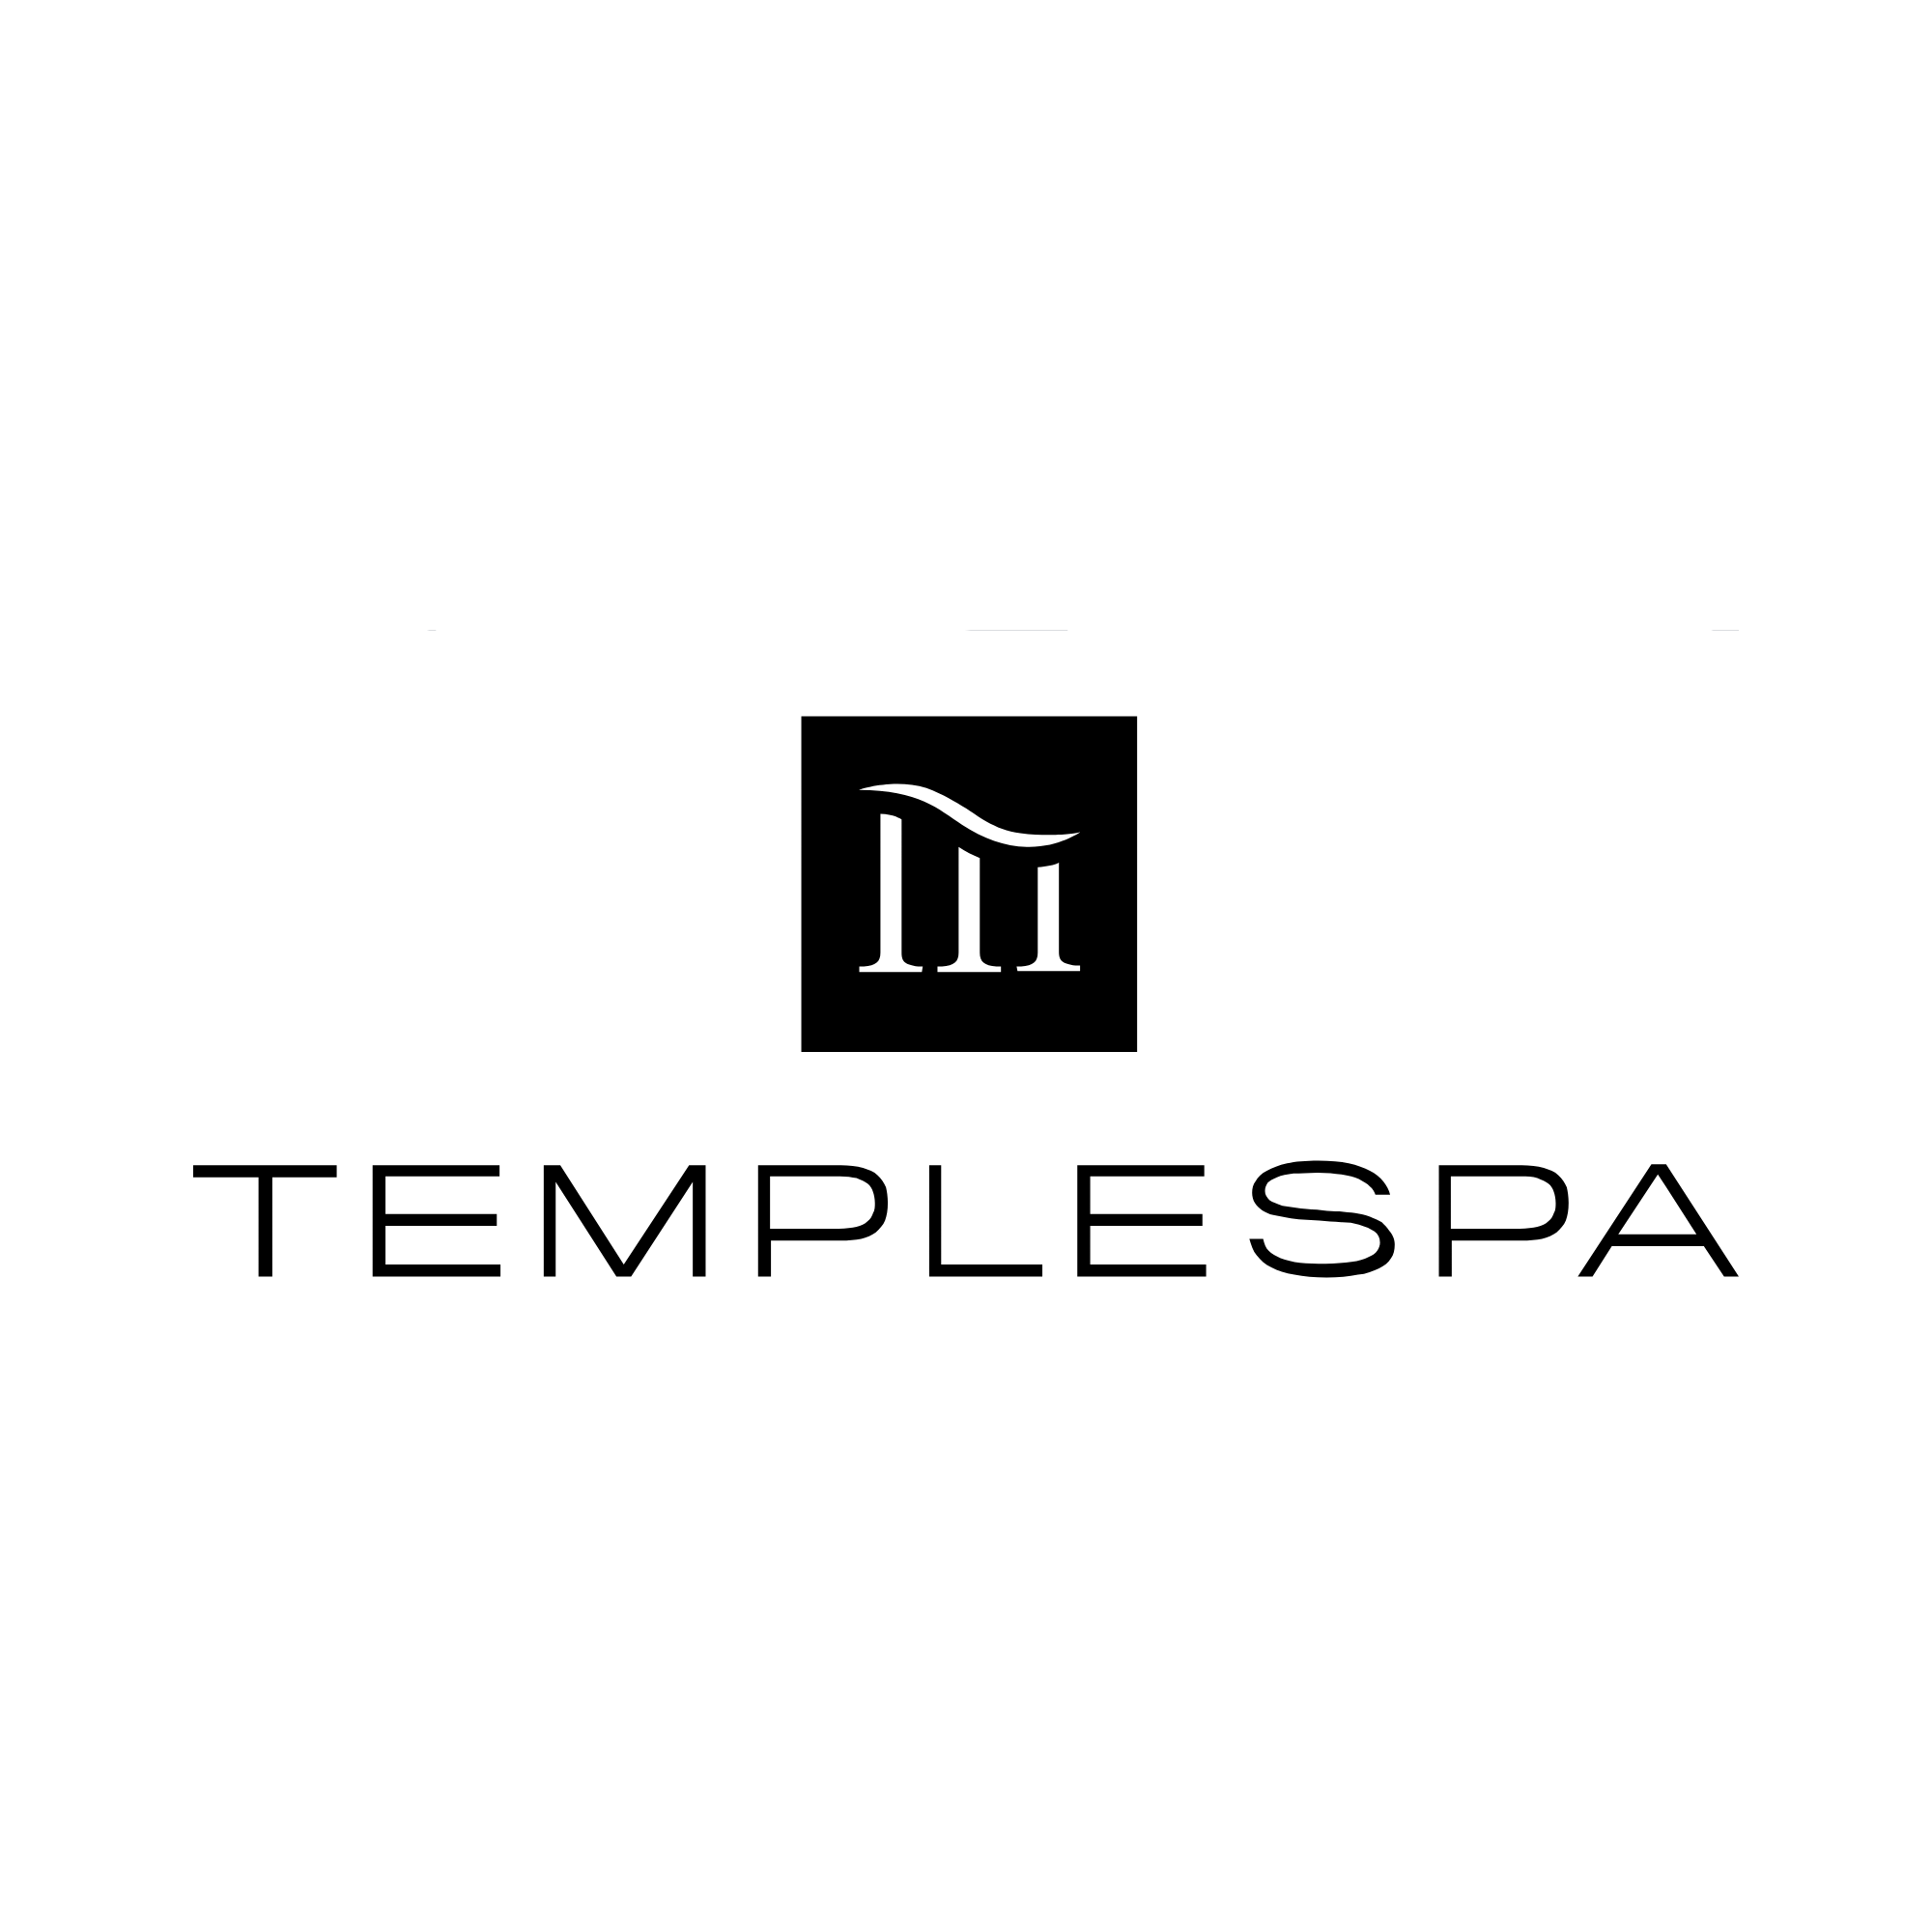 Temple Spa Coupons & Promo Codes